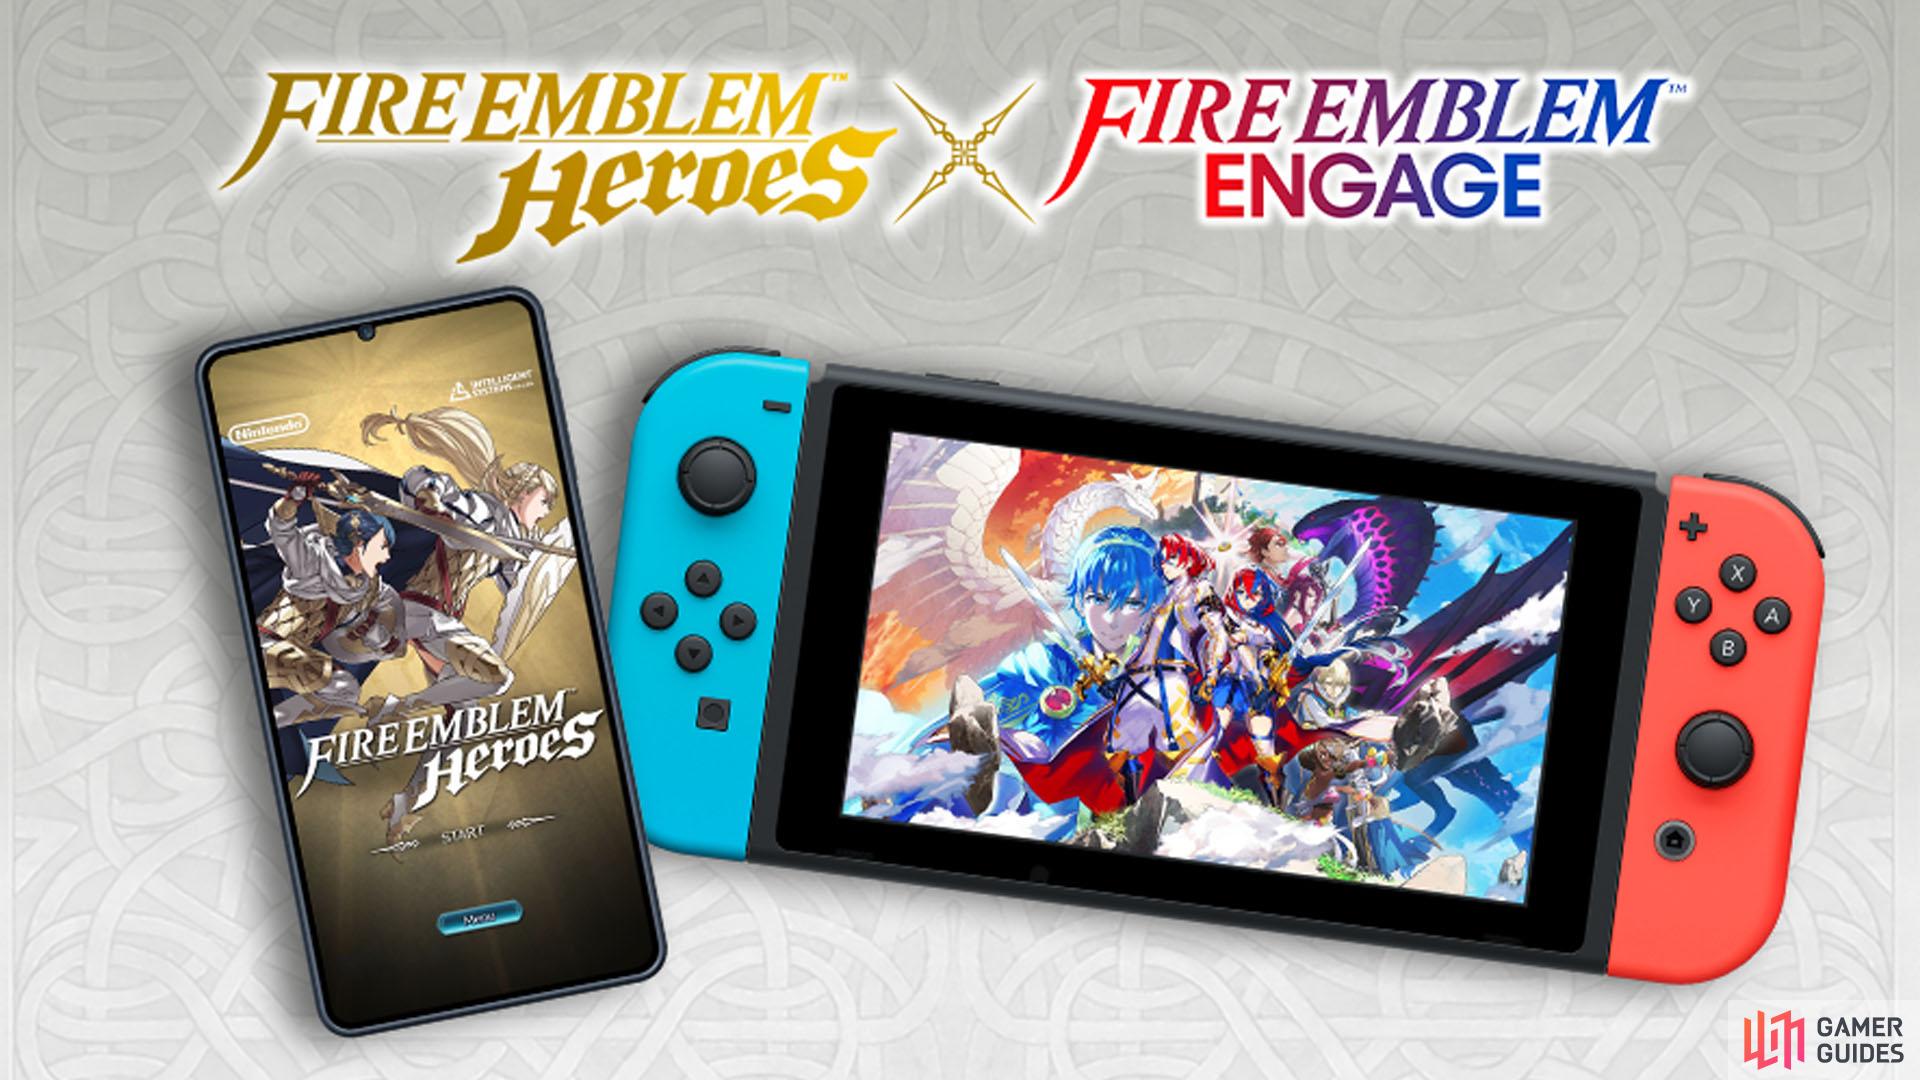 !Fire Emblem Heroes X Engage crossover